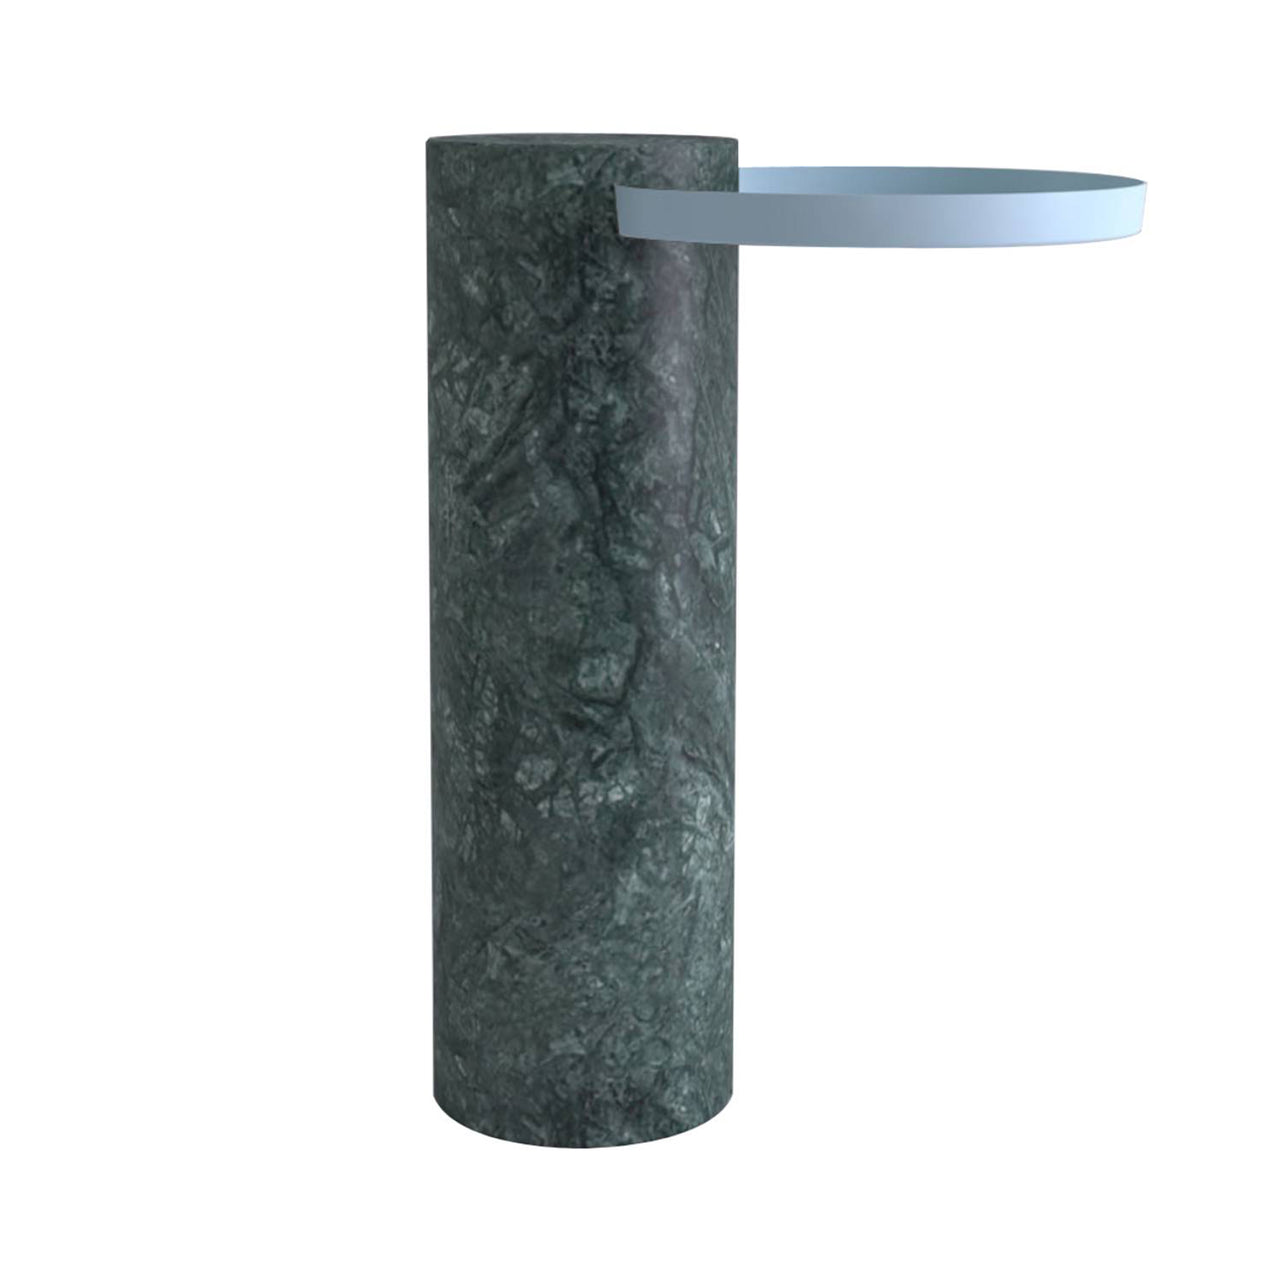 Salute Side Table: High + Indian Green Marble + Light Blue